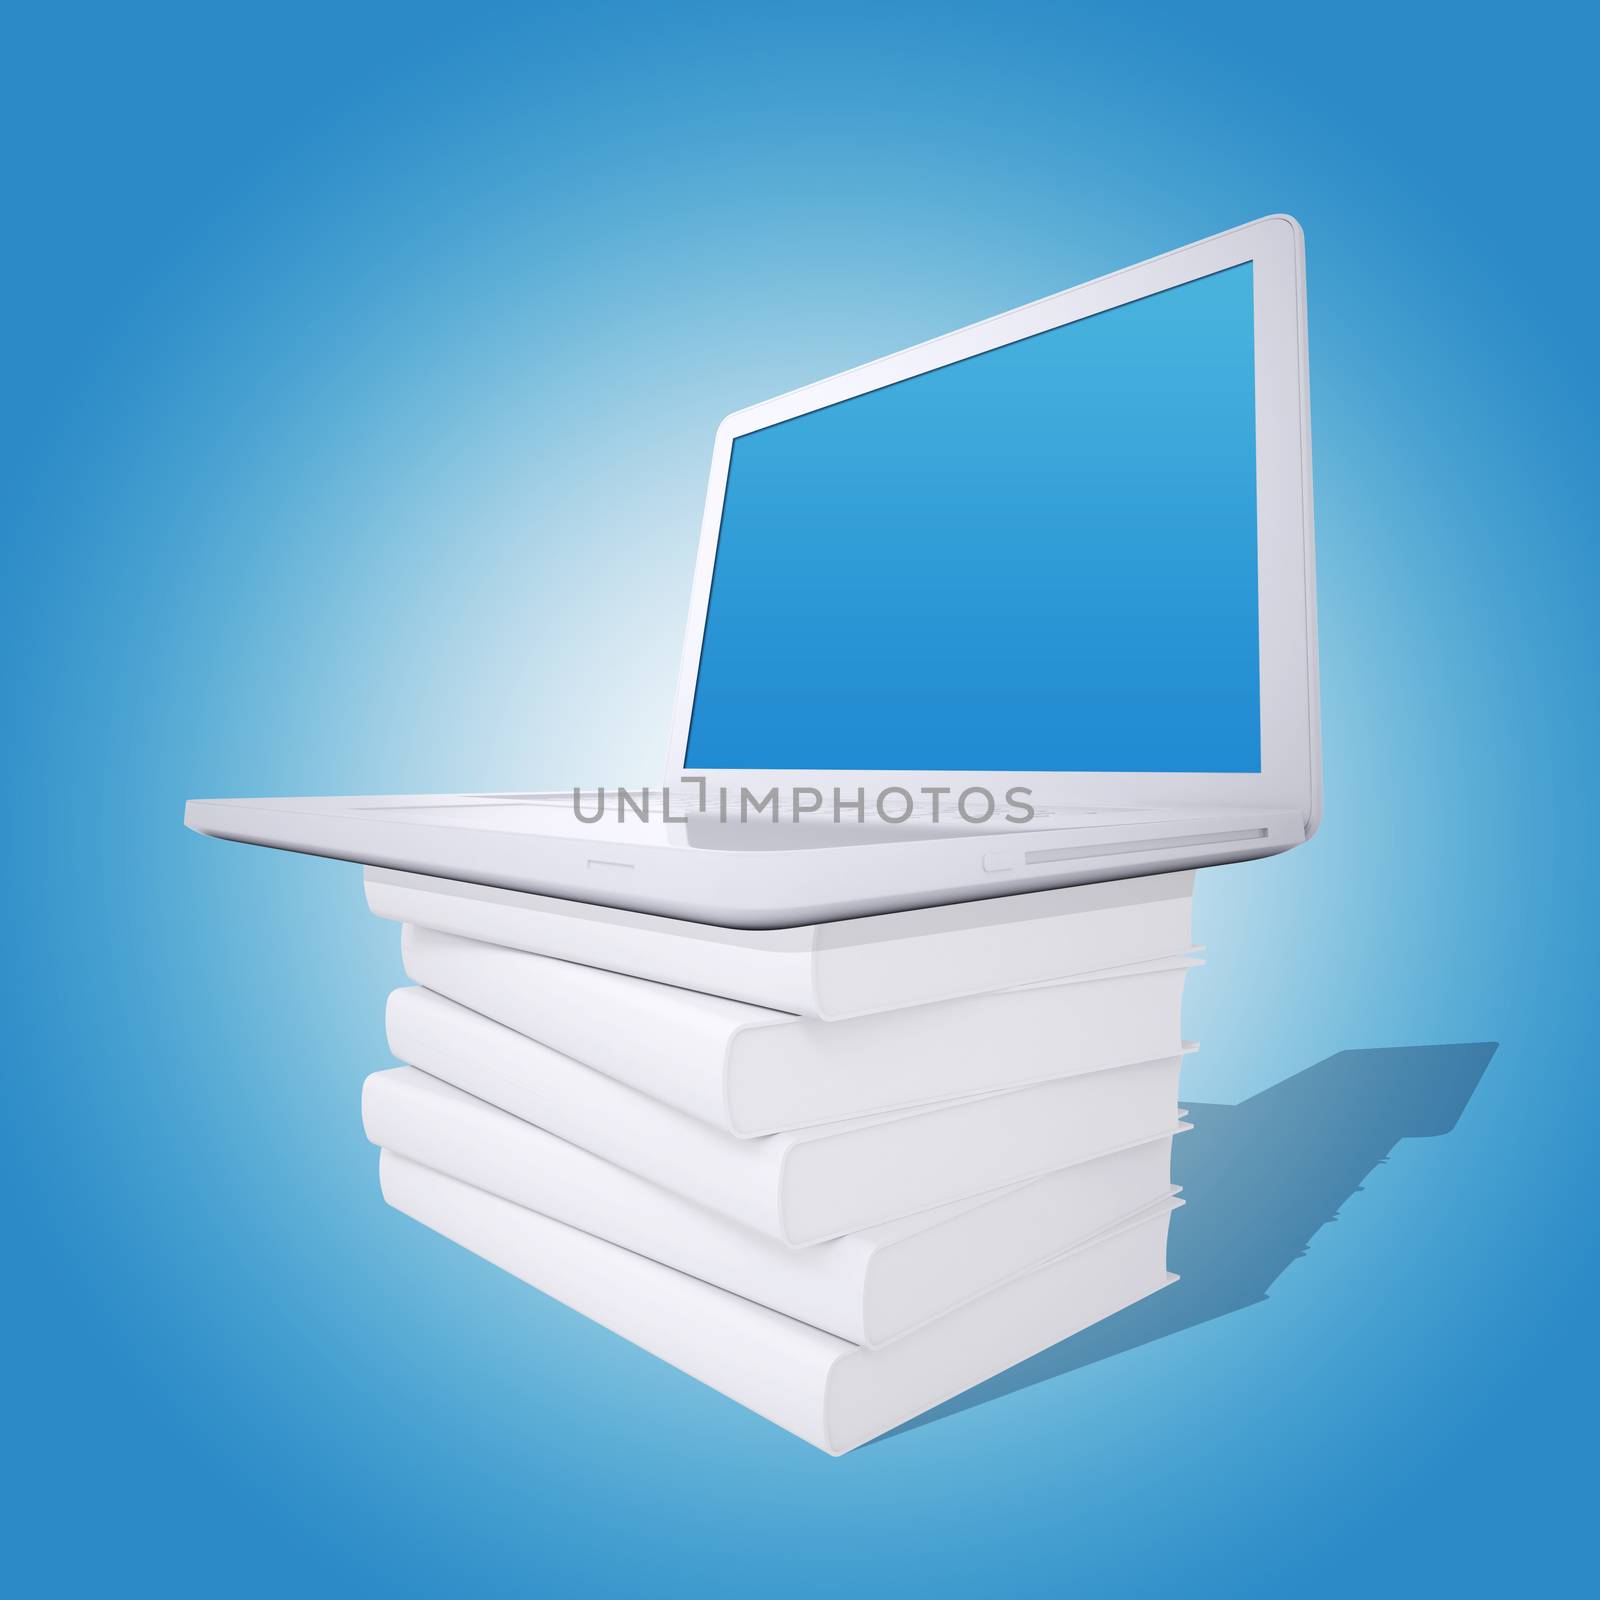 Laptop on a pile of white books. Blue background. Laptop screen is empty